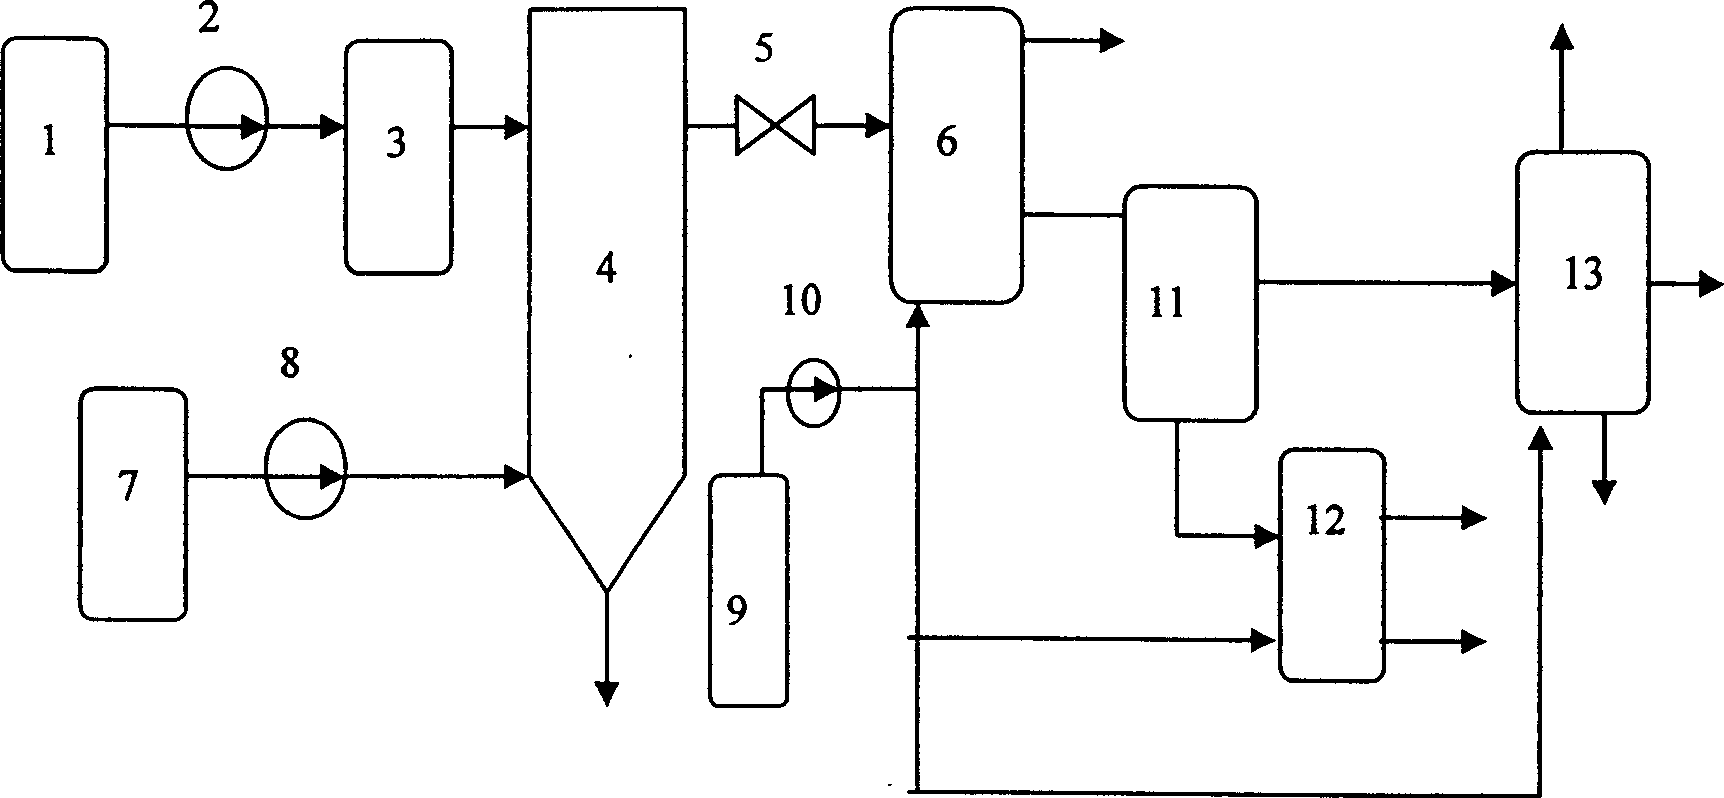 Internal combustion circulating energy conversion system for supercritical oxidation